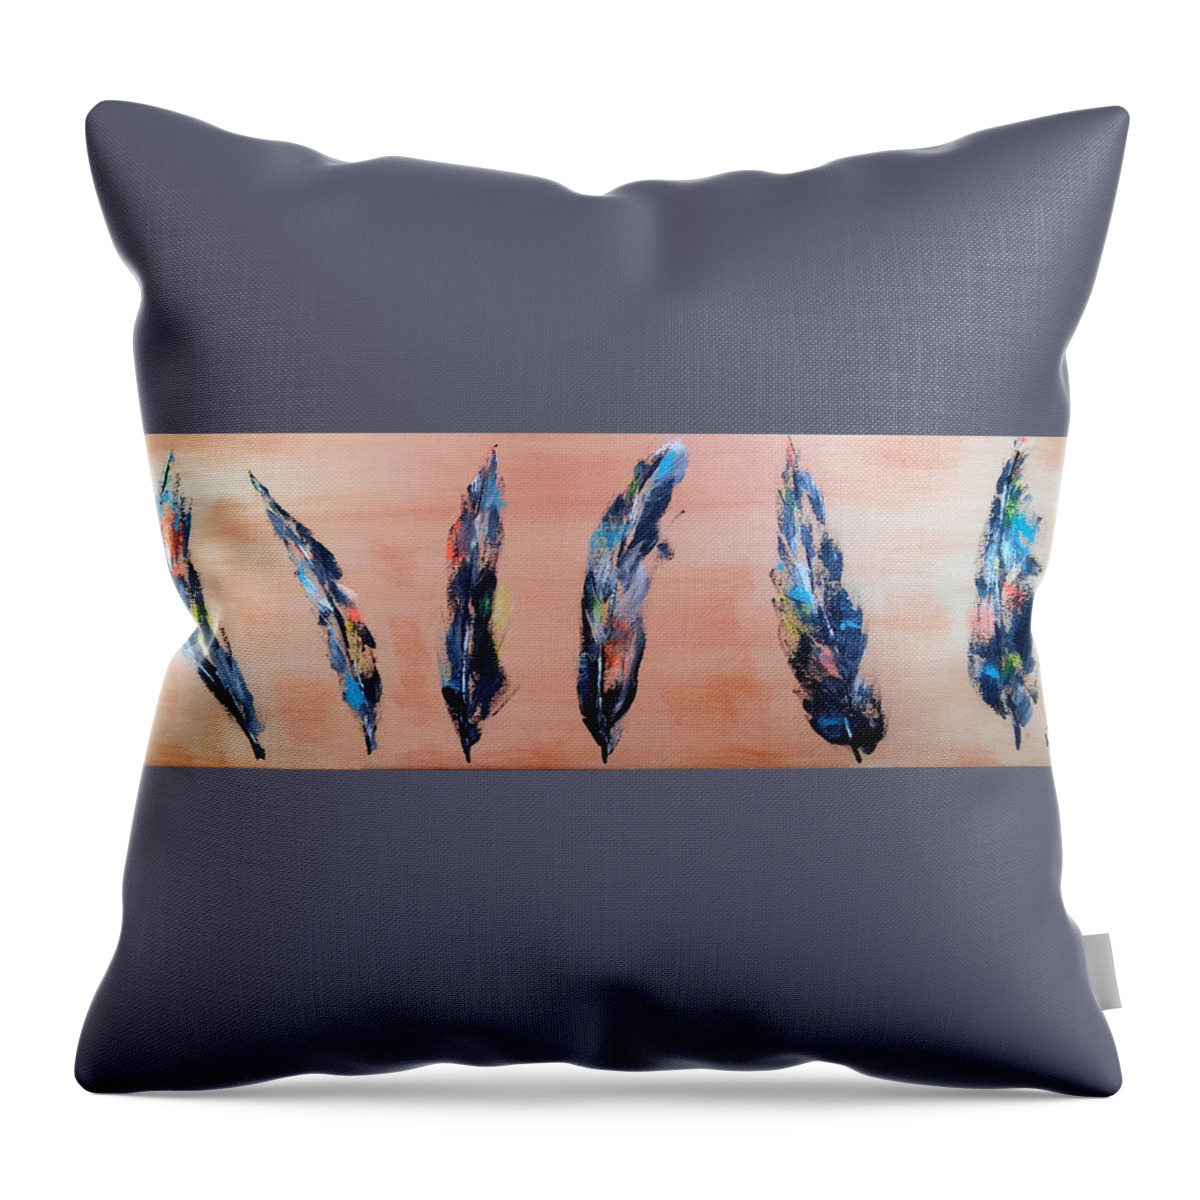 6 Feathers Throw Pillow featuring the painting 6 Feathers by Brent Knippel